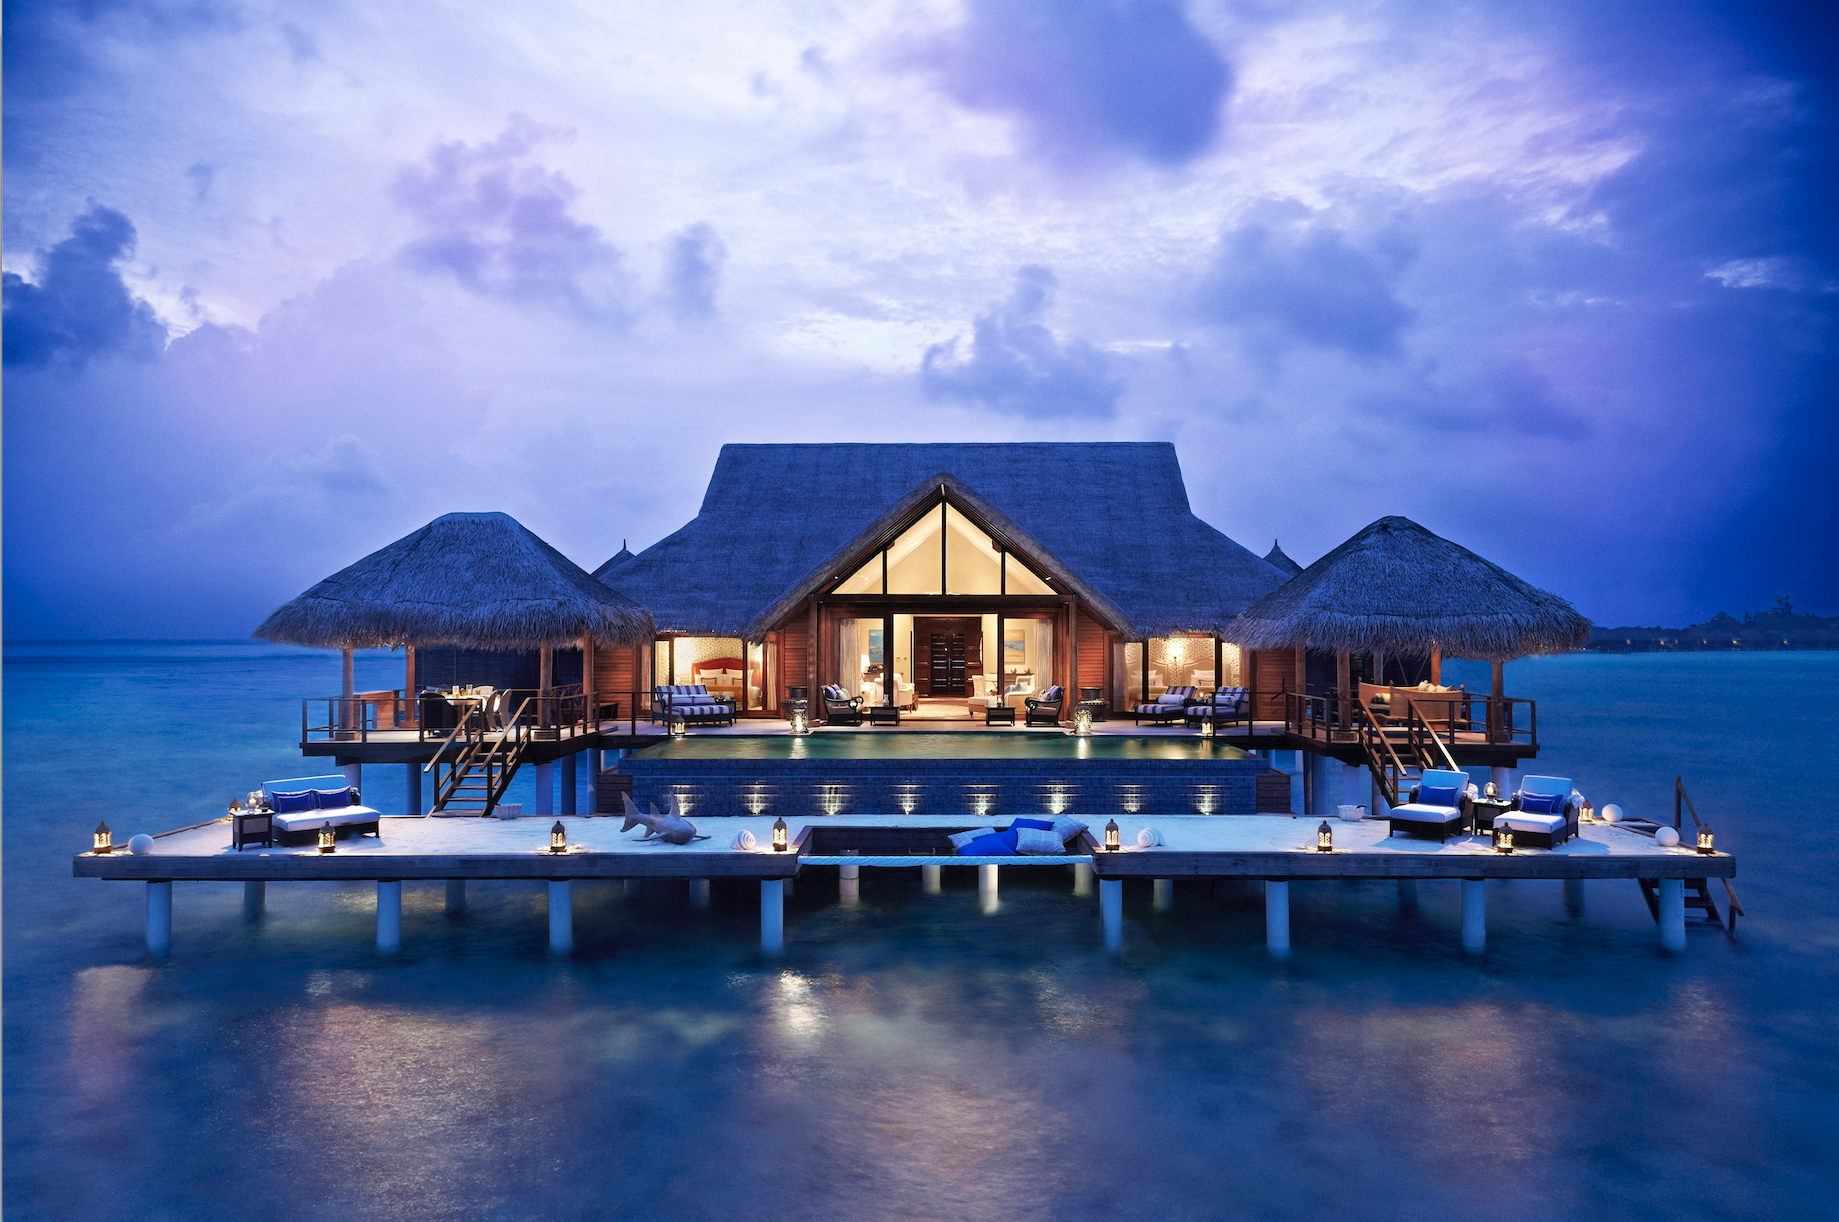   The Rehendi Presidential Overwater Suite, called “the most beautiful place on earth” by previous guests (photo credit: Taj Hotels)  